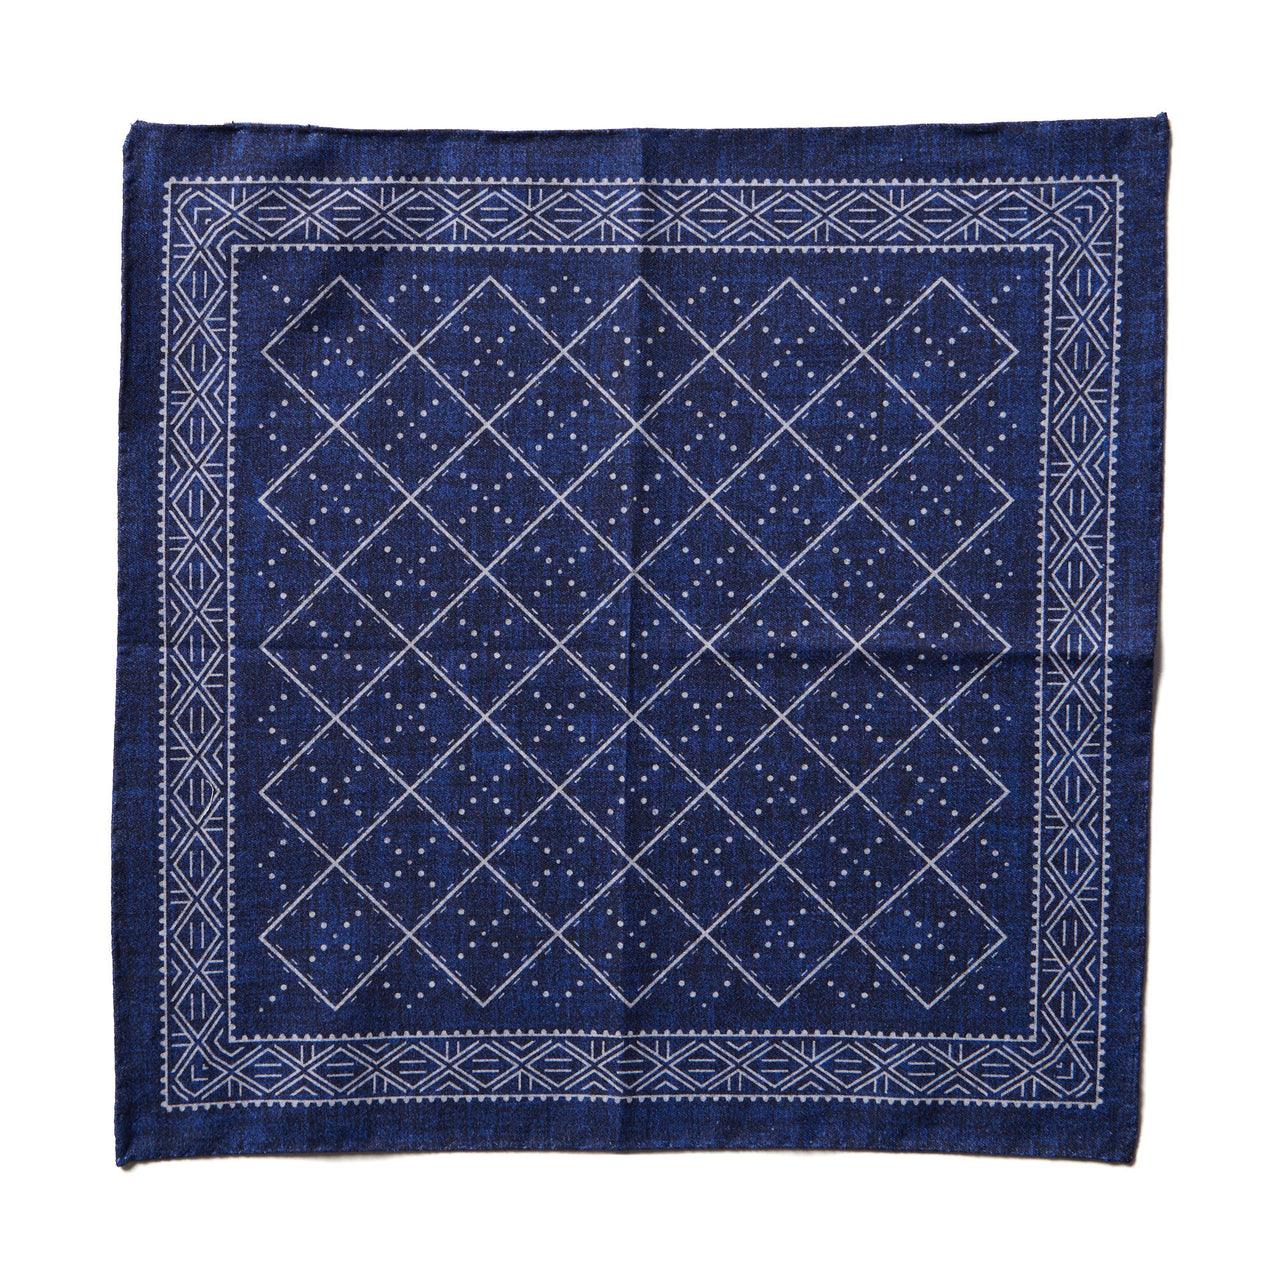 HENRY SARTORIAL X CANTINI Cotton Pocket Square NAVY